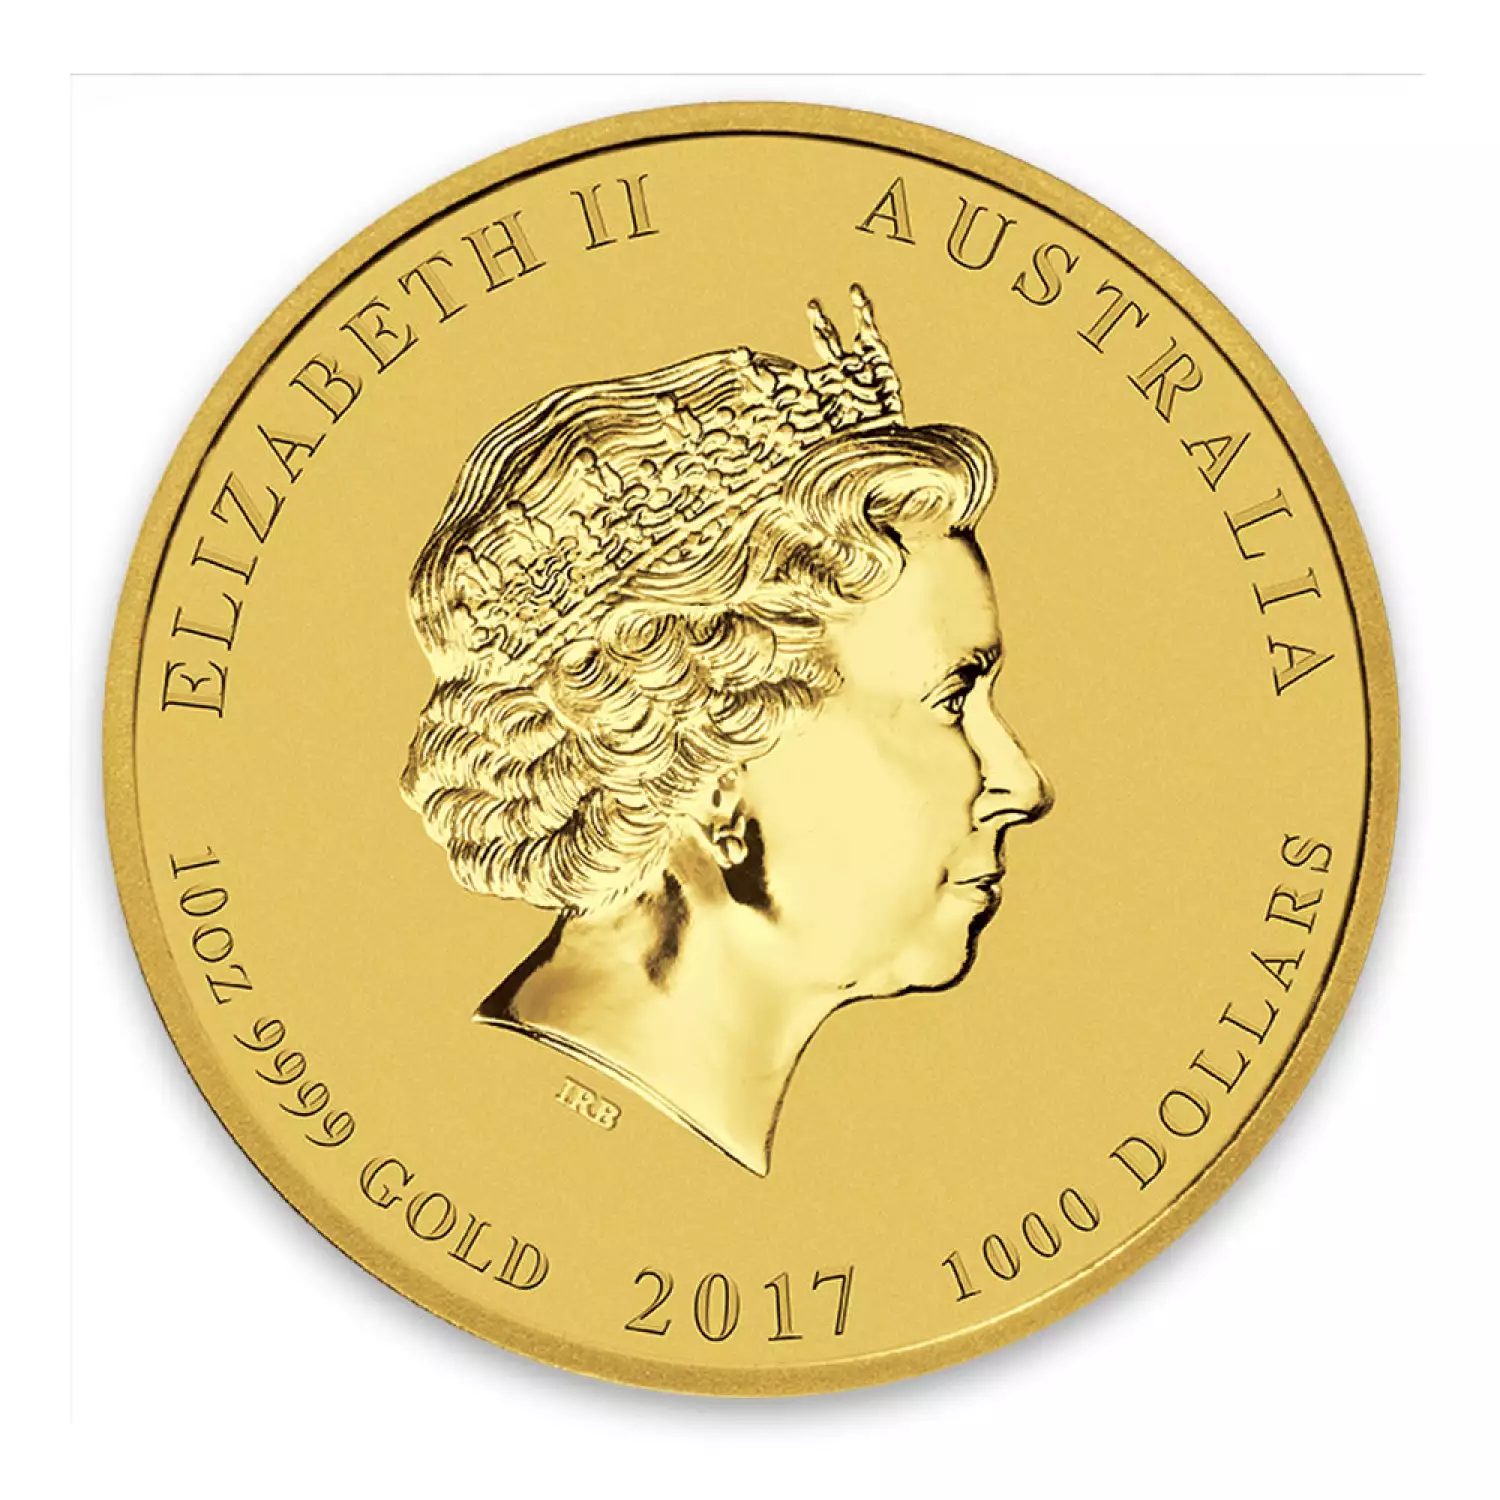 2017 10oz Australian Perth Mint Gold Lunar II: Year of the Rooster (2)